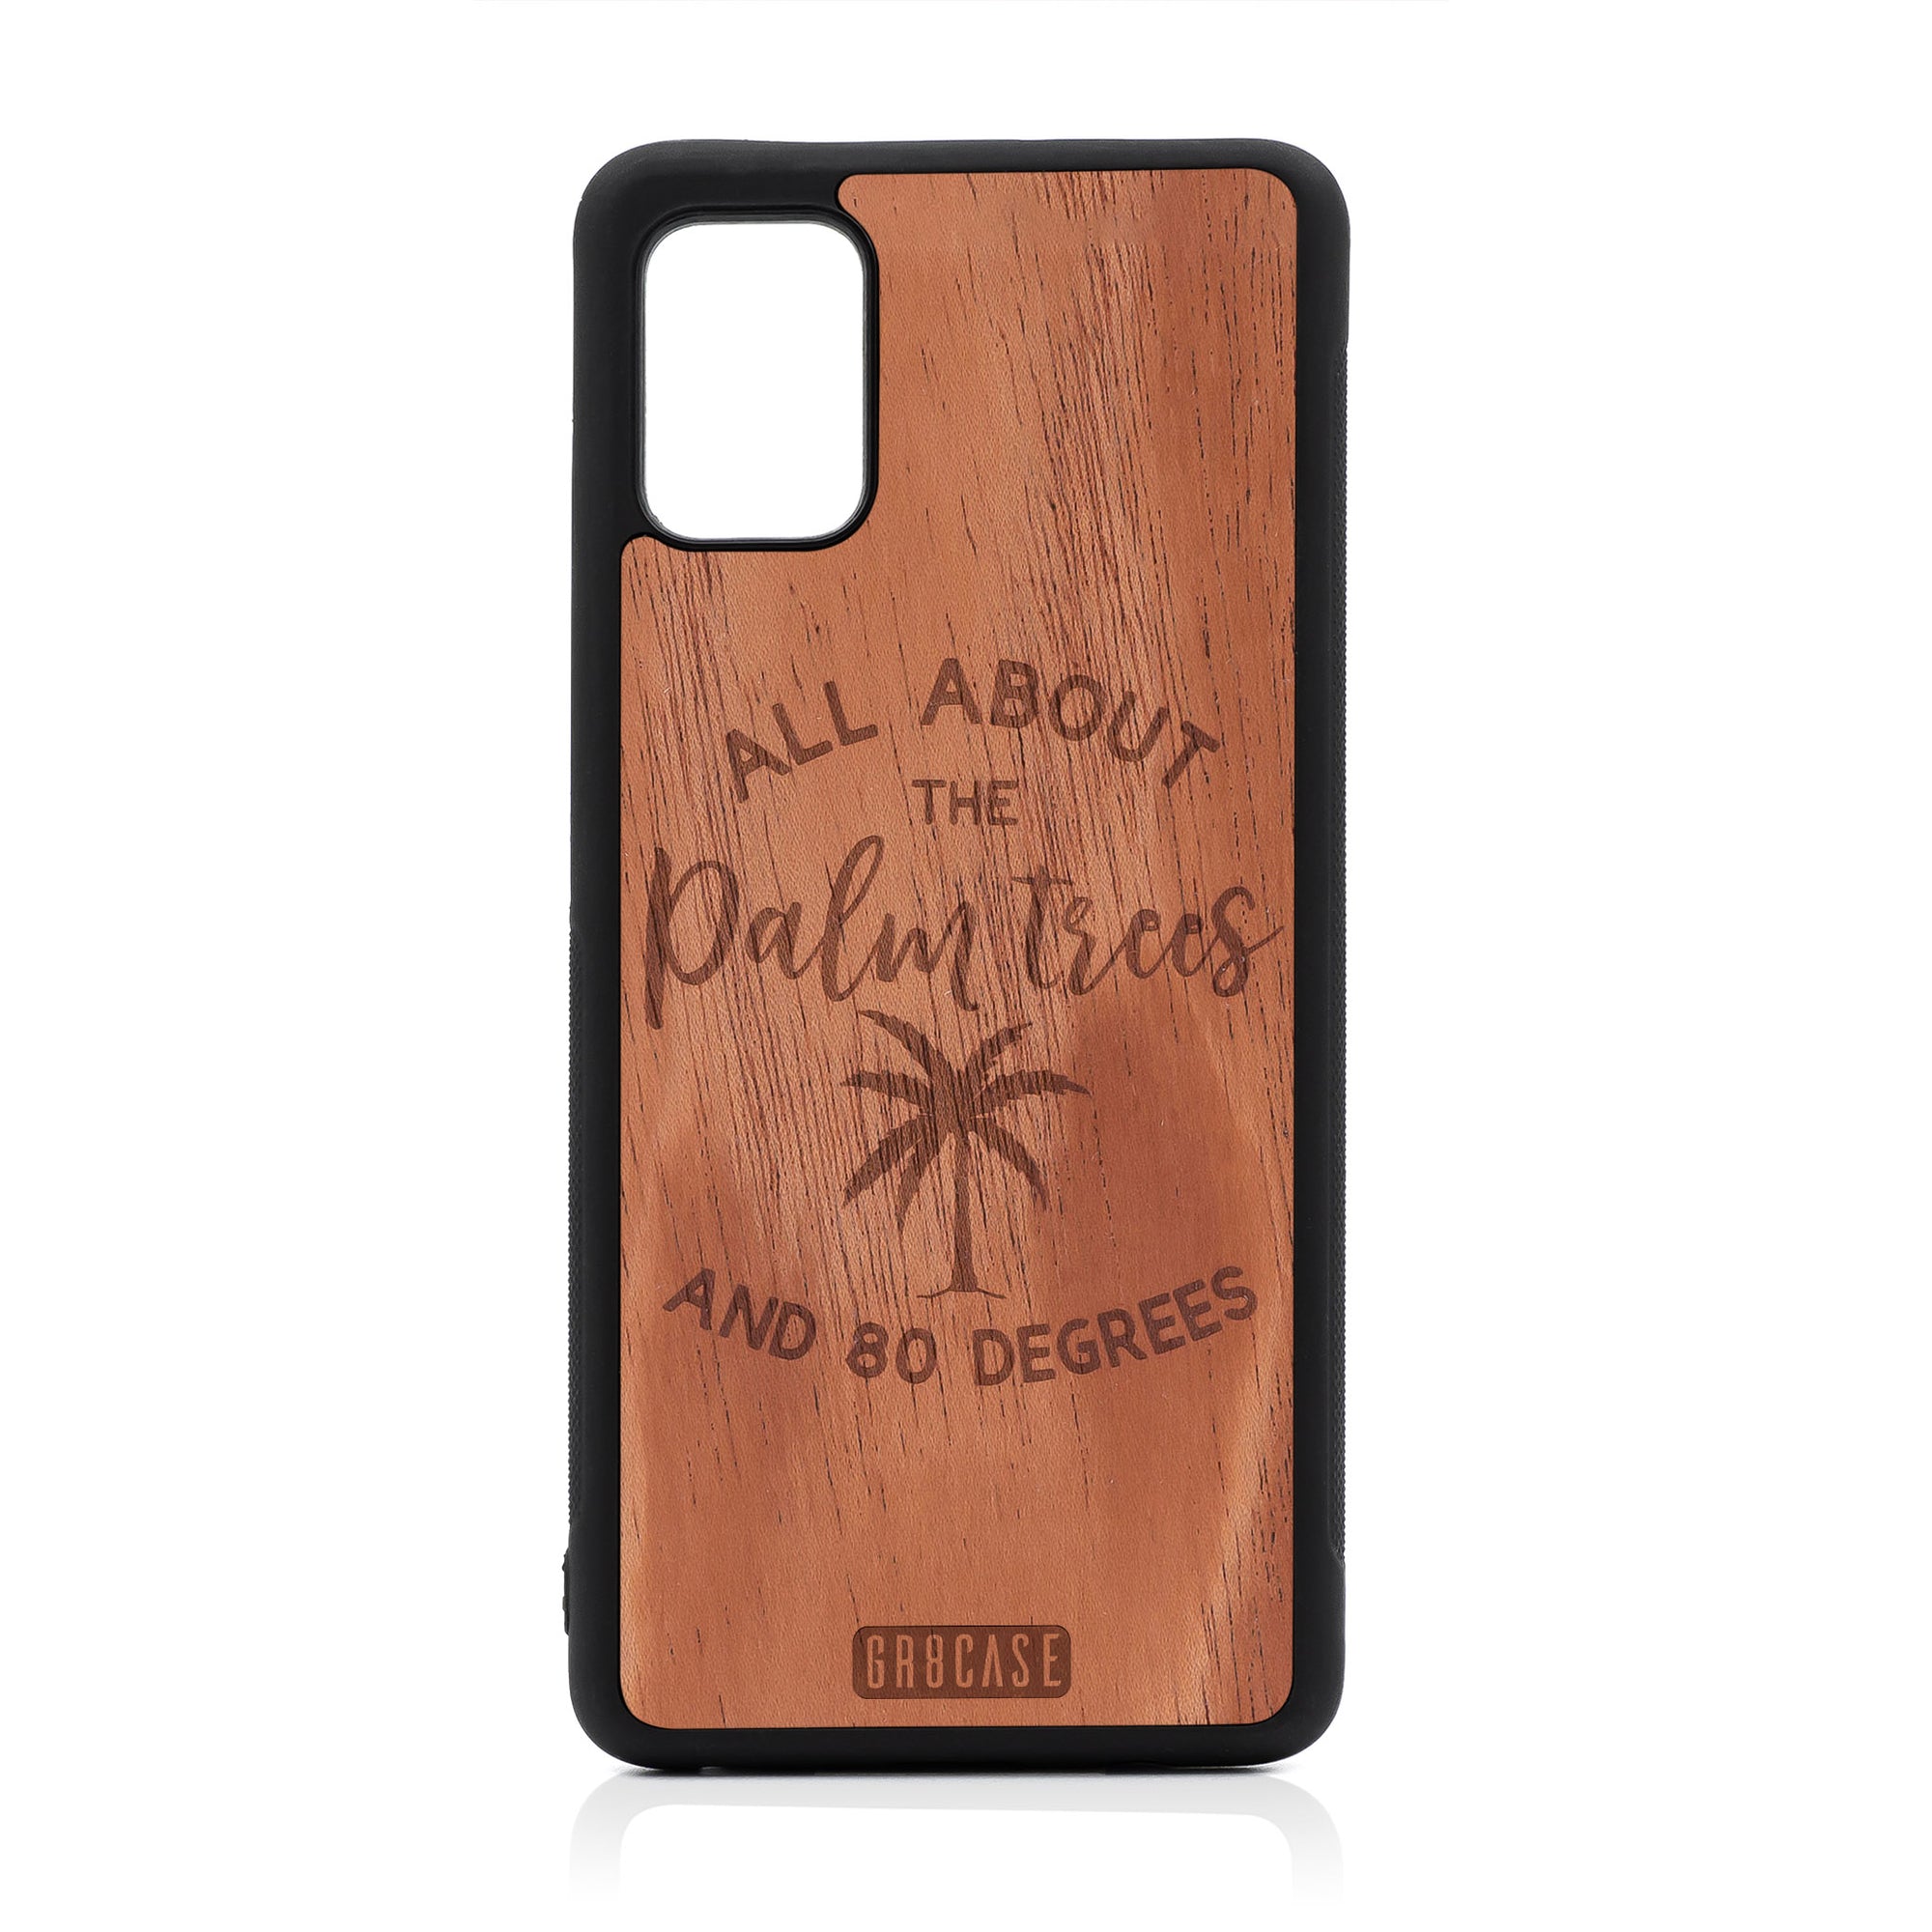 All About The Palm Trees And 80 Degrees Design Wood Case For Samsung Galaxy A51 5G